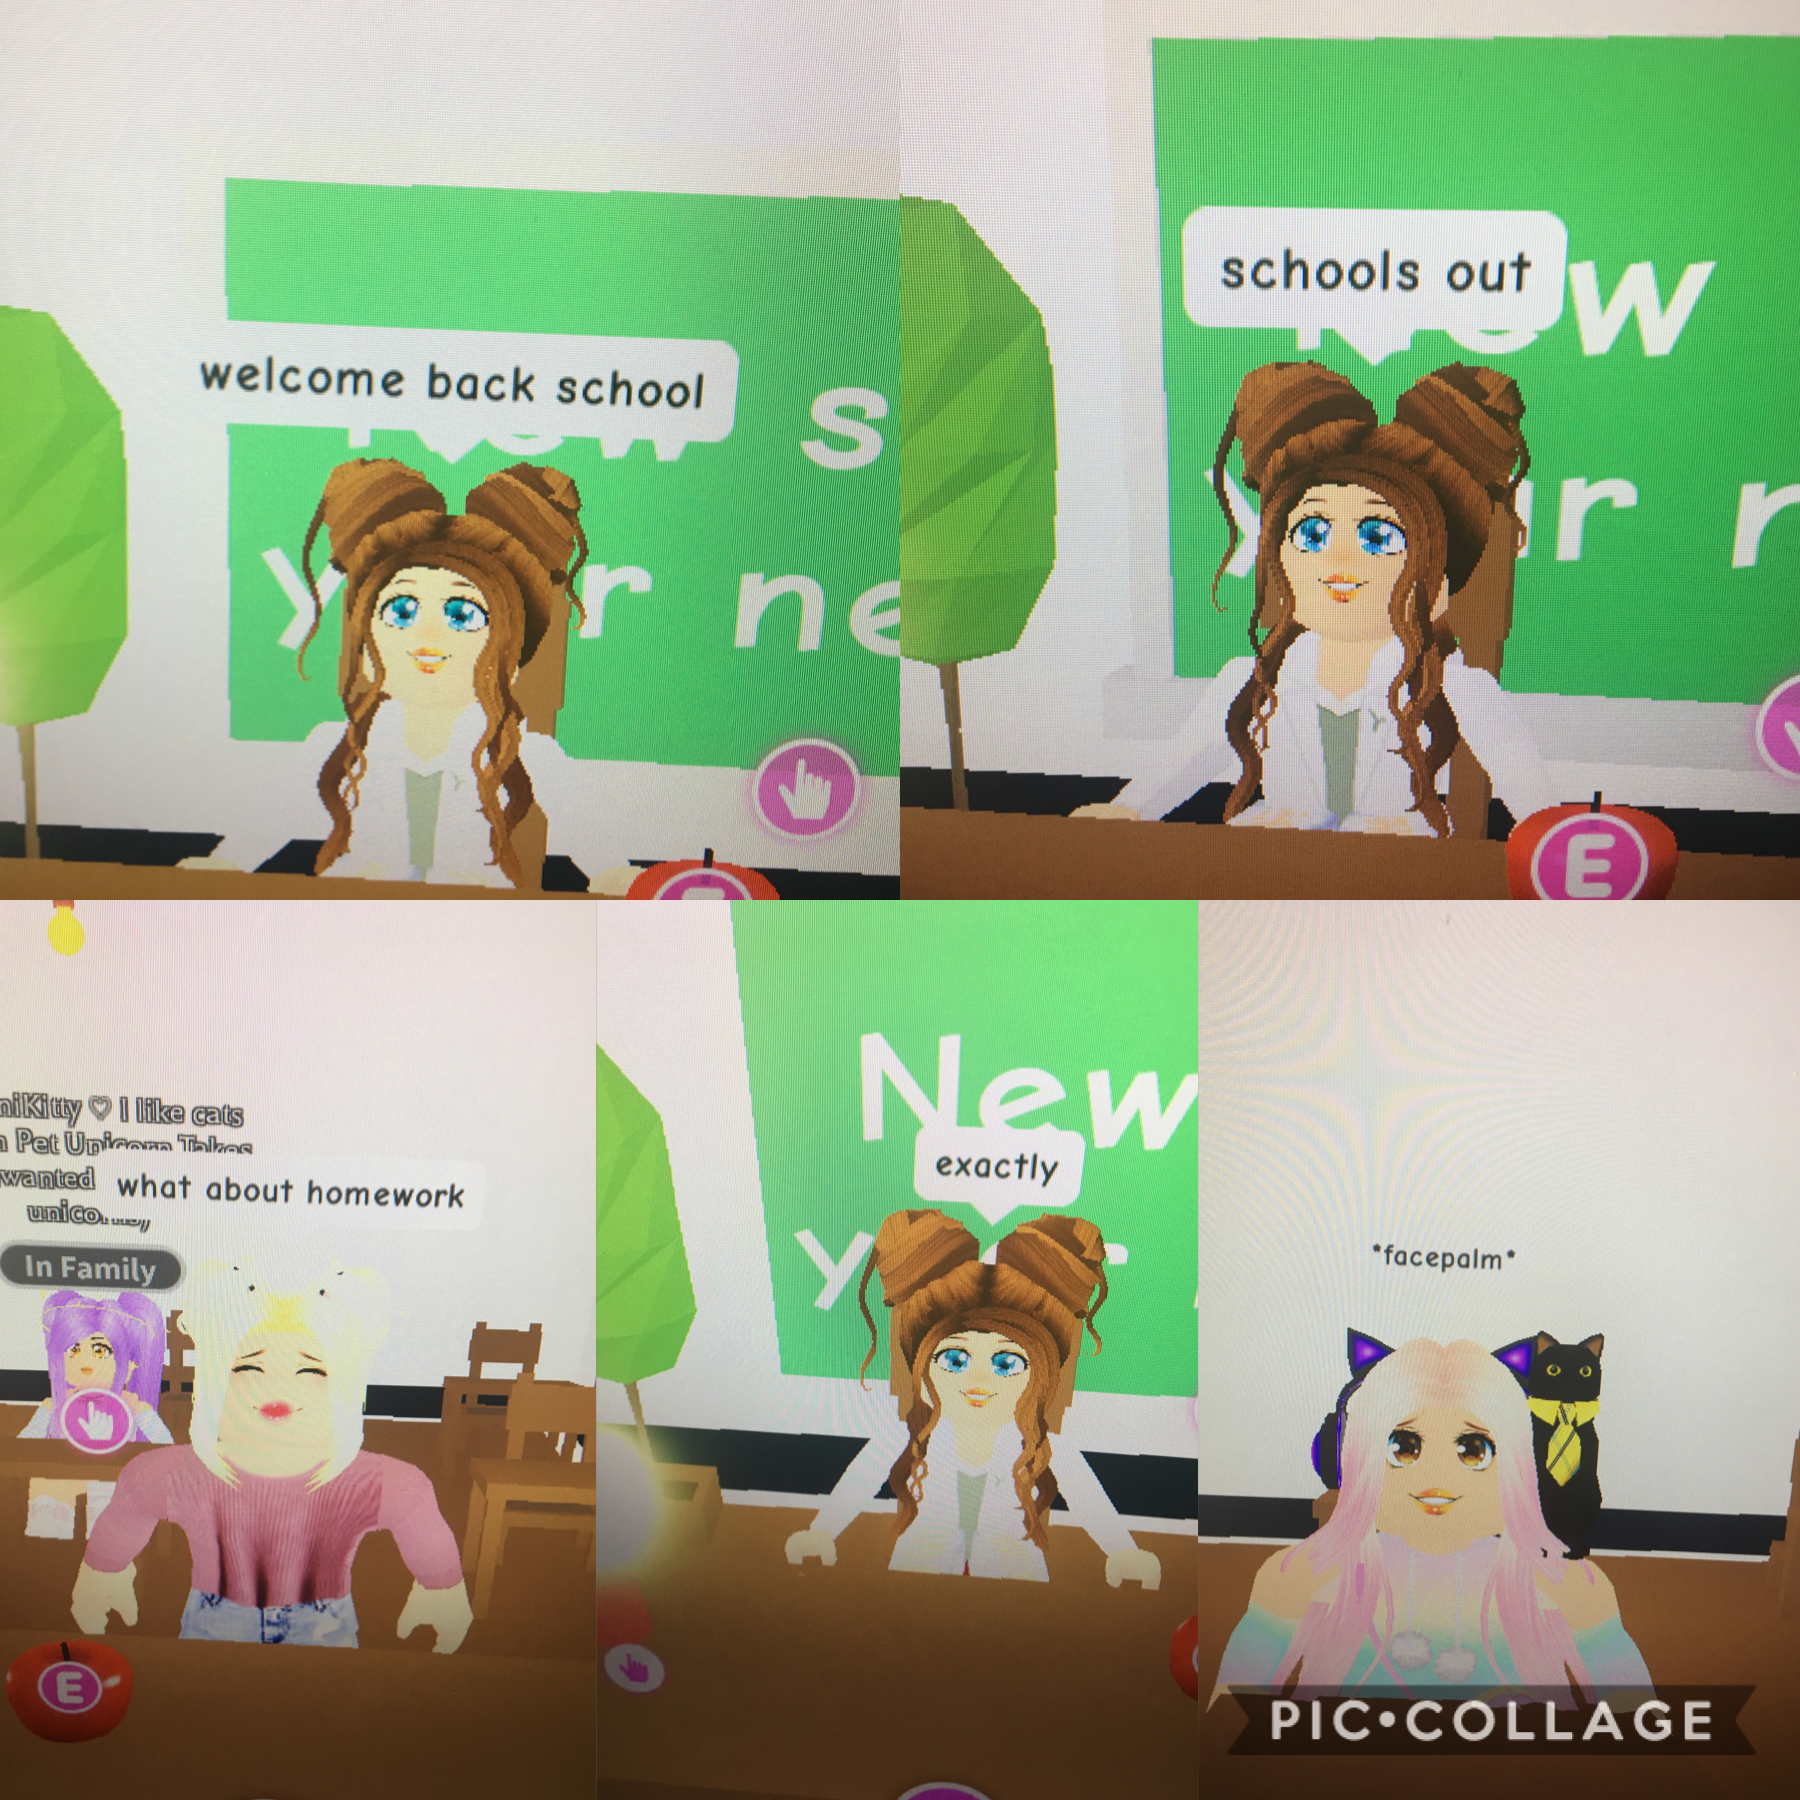 Tap
Do you want to play with me? Just go follow me ion roblox at SLIMEyall!